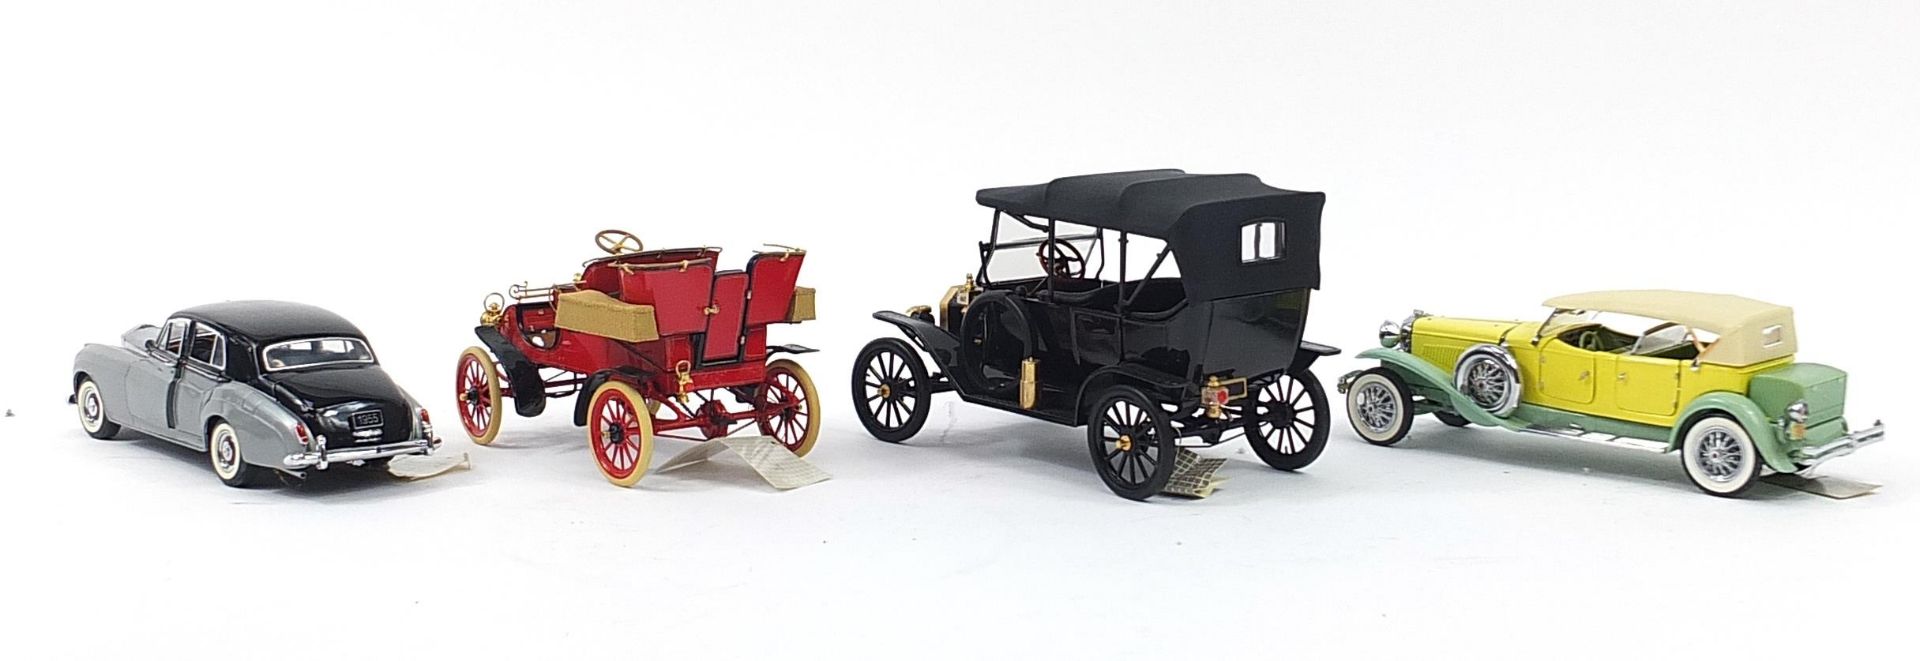 Four Franklin Mint diecast collector's vehicles including 1995 Rolls Royce Silver Cloud 1 and 1911 - Image 4 of 4